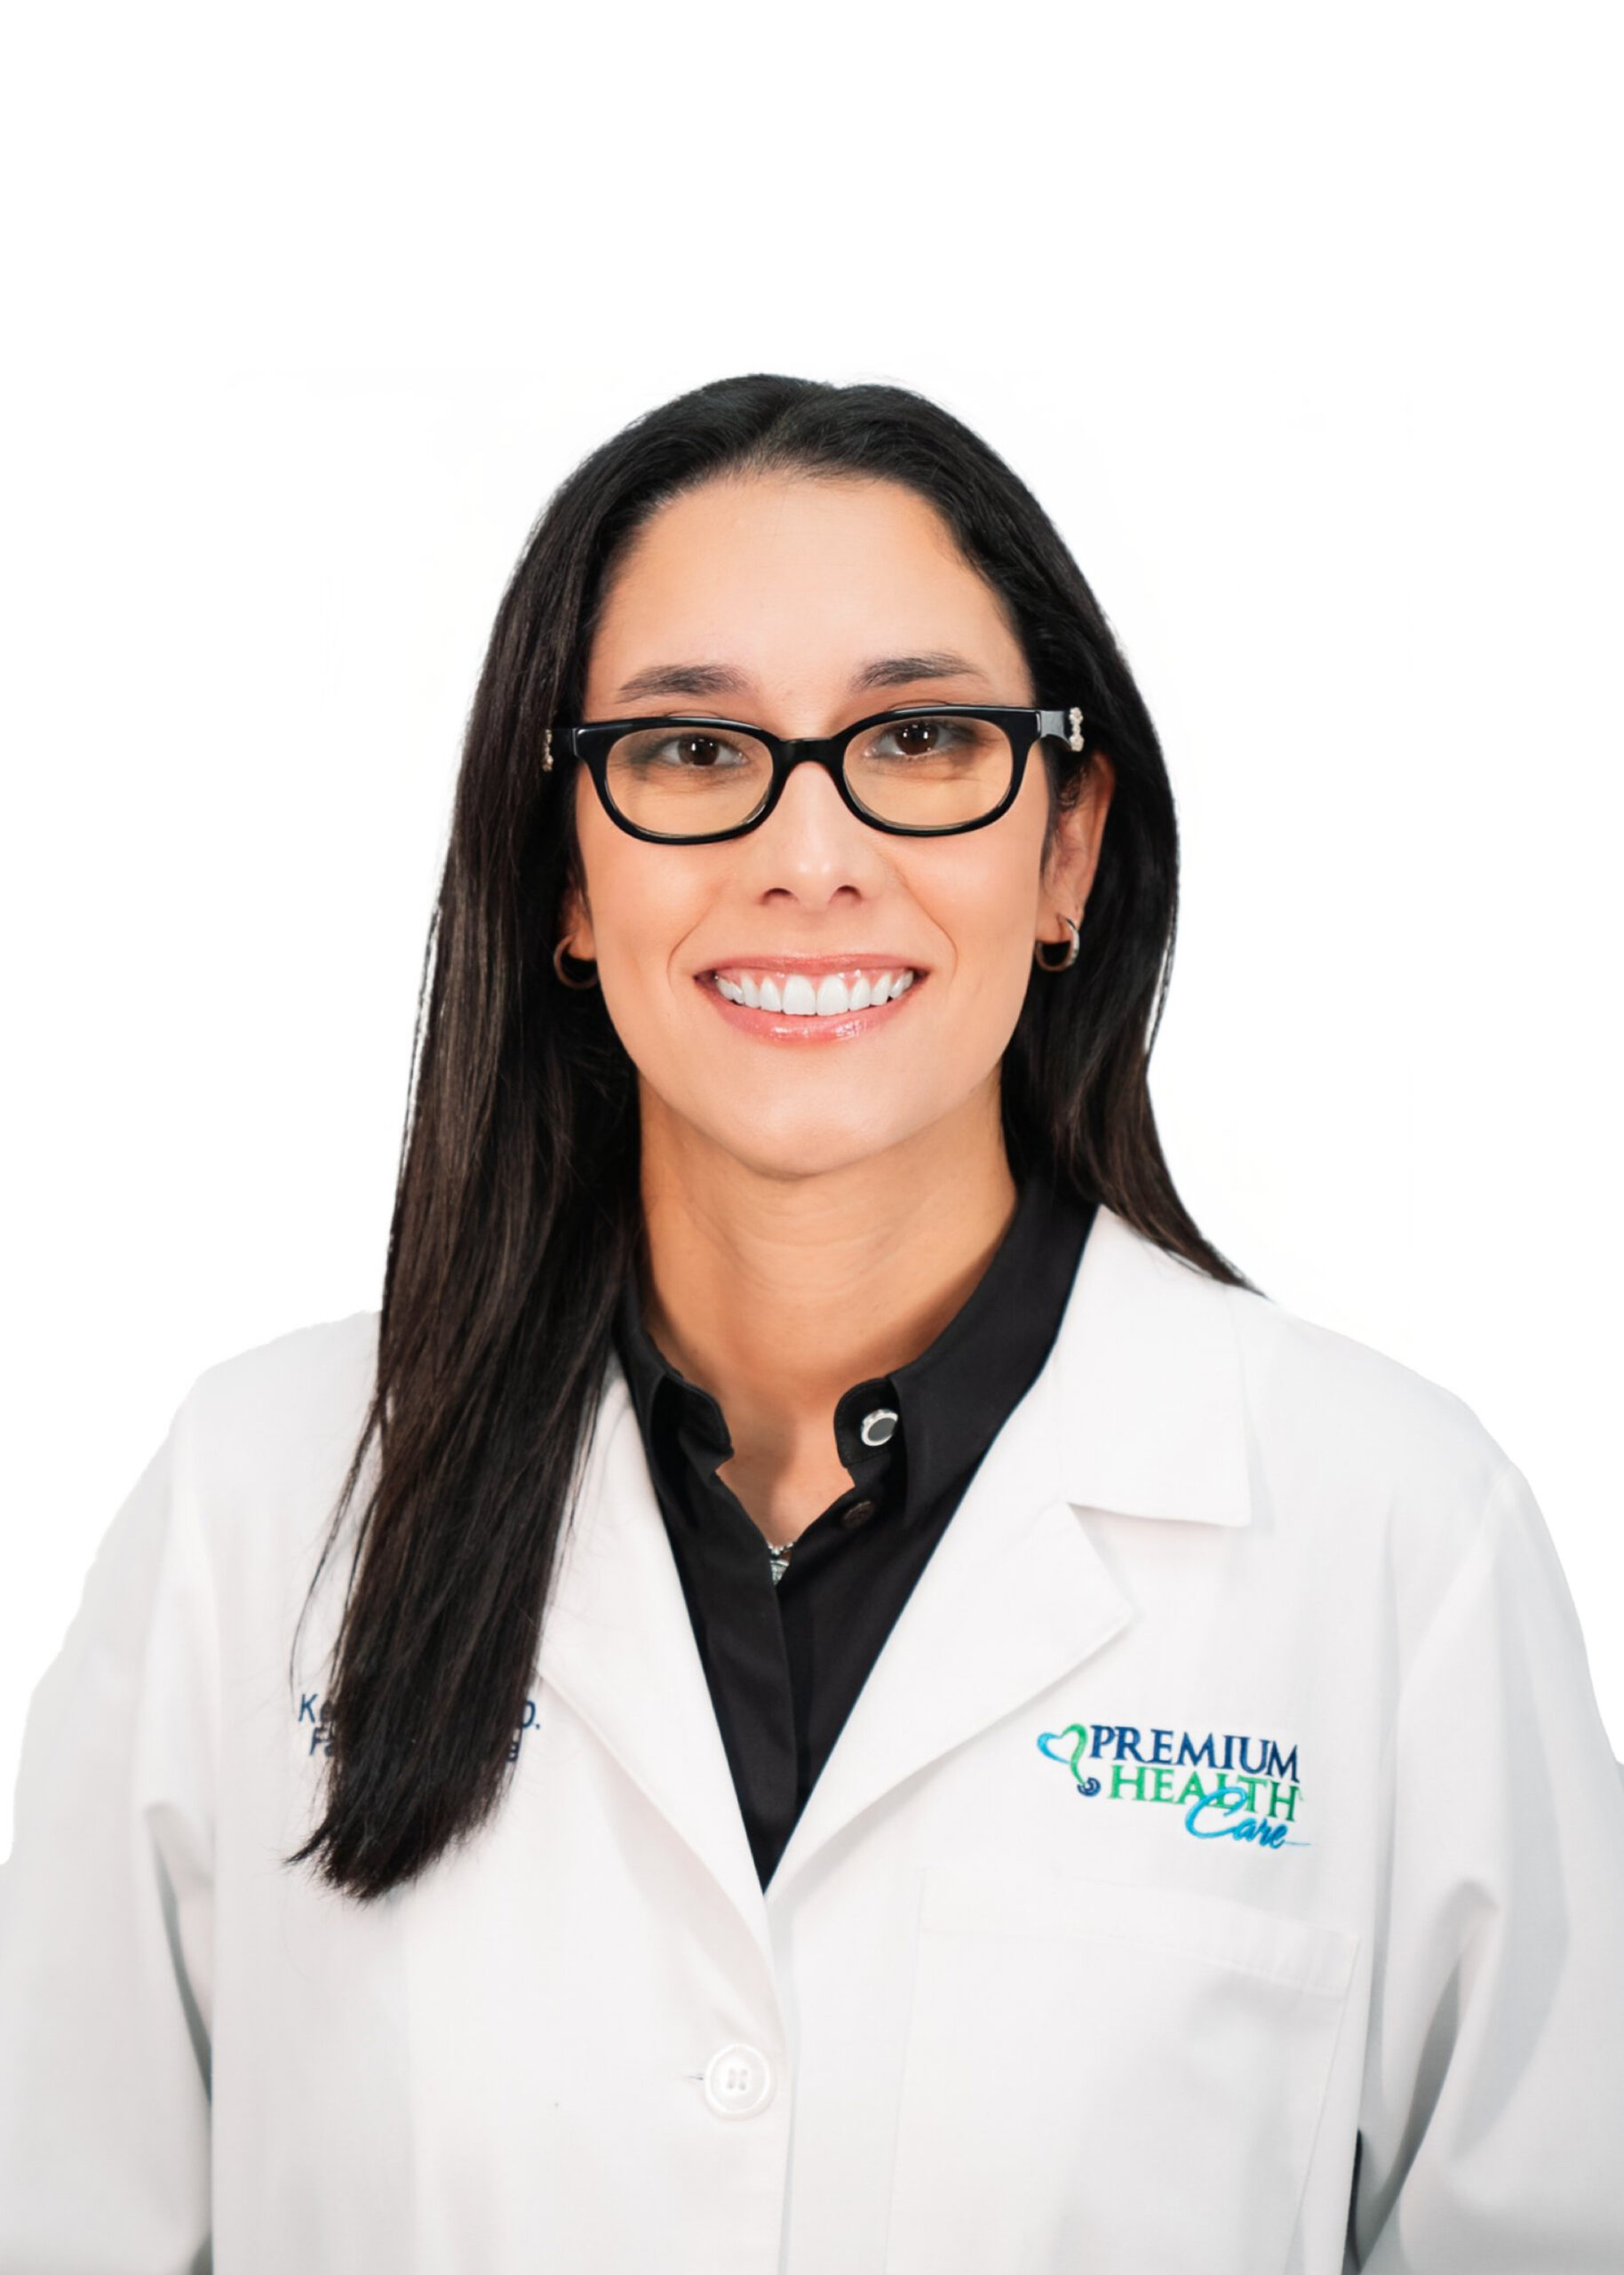 Primary Care Primary care provider Doctors near me Family medicine Family practice medical provider primary provider primary doctor family provider family doctor Miami doctor Primary care physician physician Keila Hoover dr.hoover